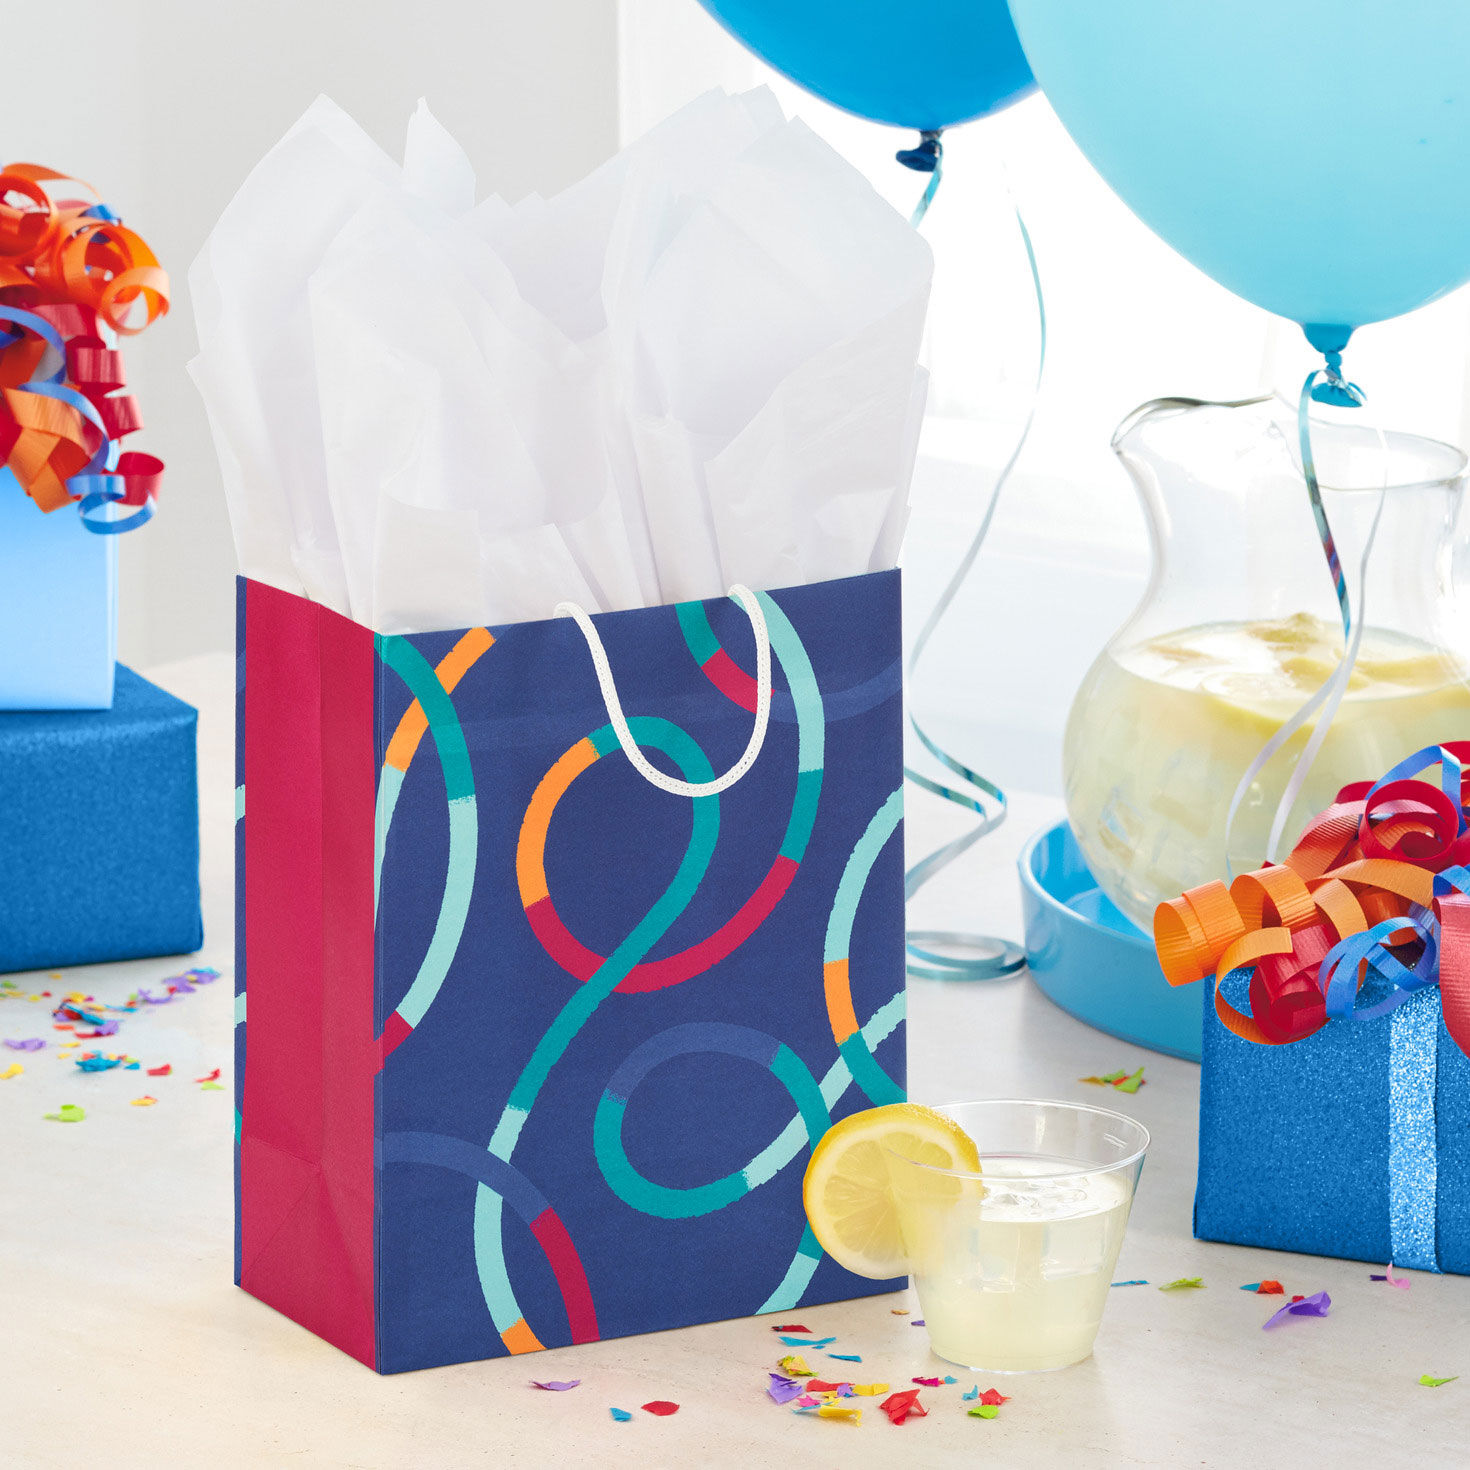 9.6" Colorful Loops on Blue Medium Gift Bag for only USD 3.49 | Hallmark